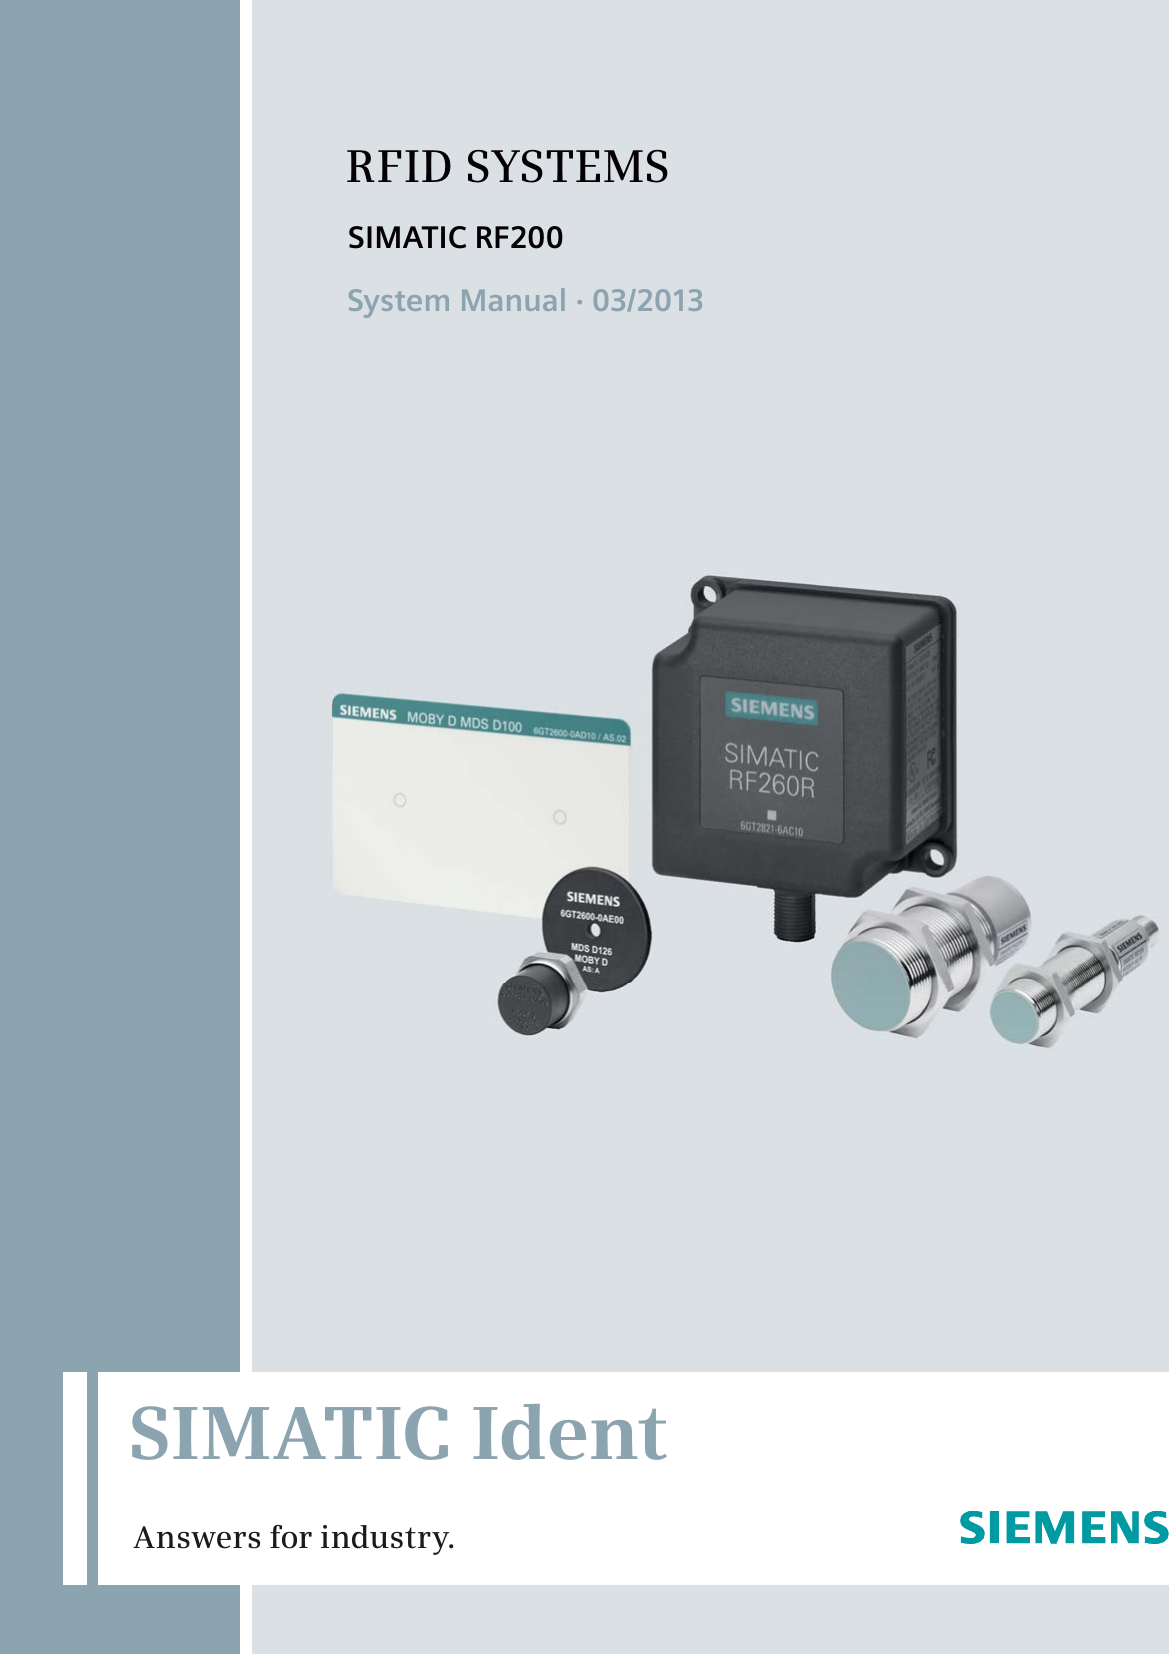  SIMATIC IdentSystem Manual · 03/2013SIMATIC RF200RFID SYSTEMSAnswers for industry.